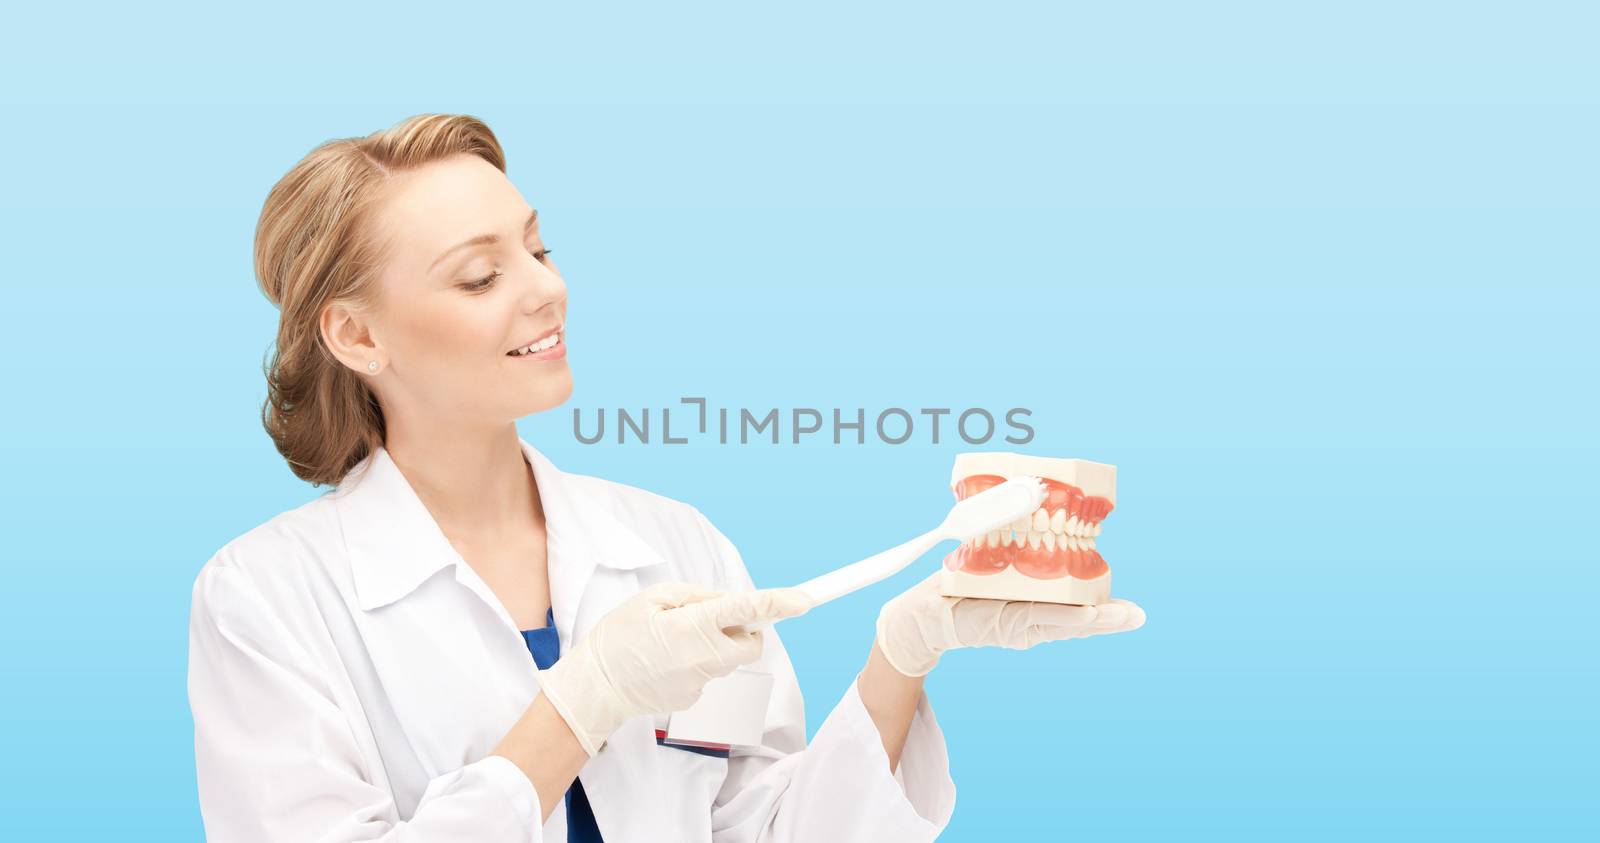 medicine, stomatology, people and hygiene concept - smiling female doctor with toothbrush and jaws model teaching how to brush teeth over blue background